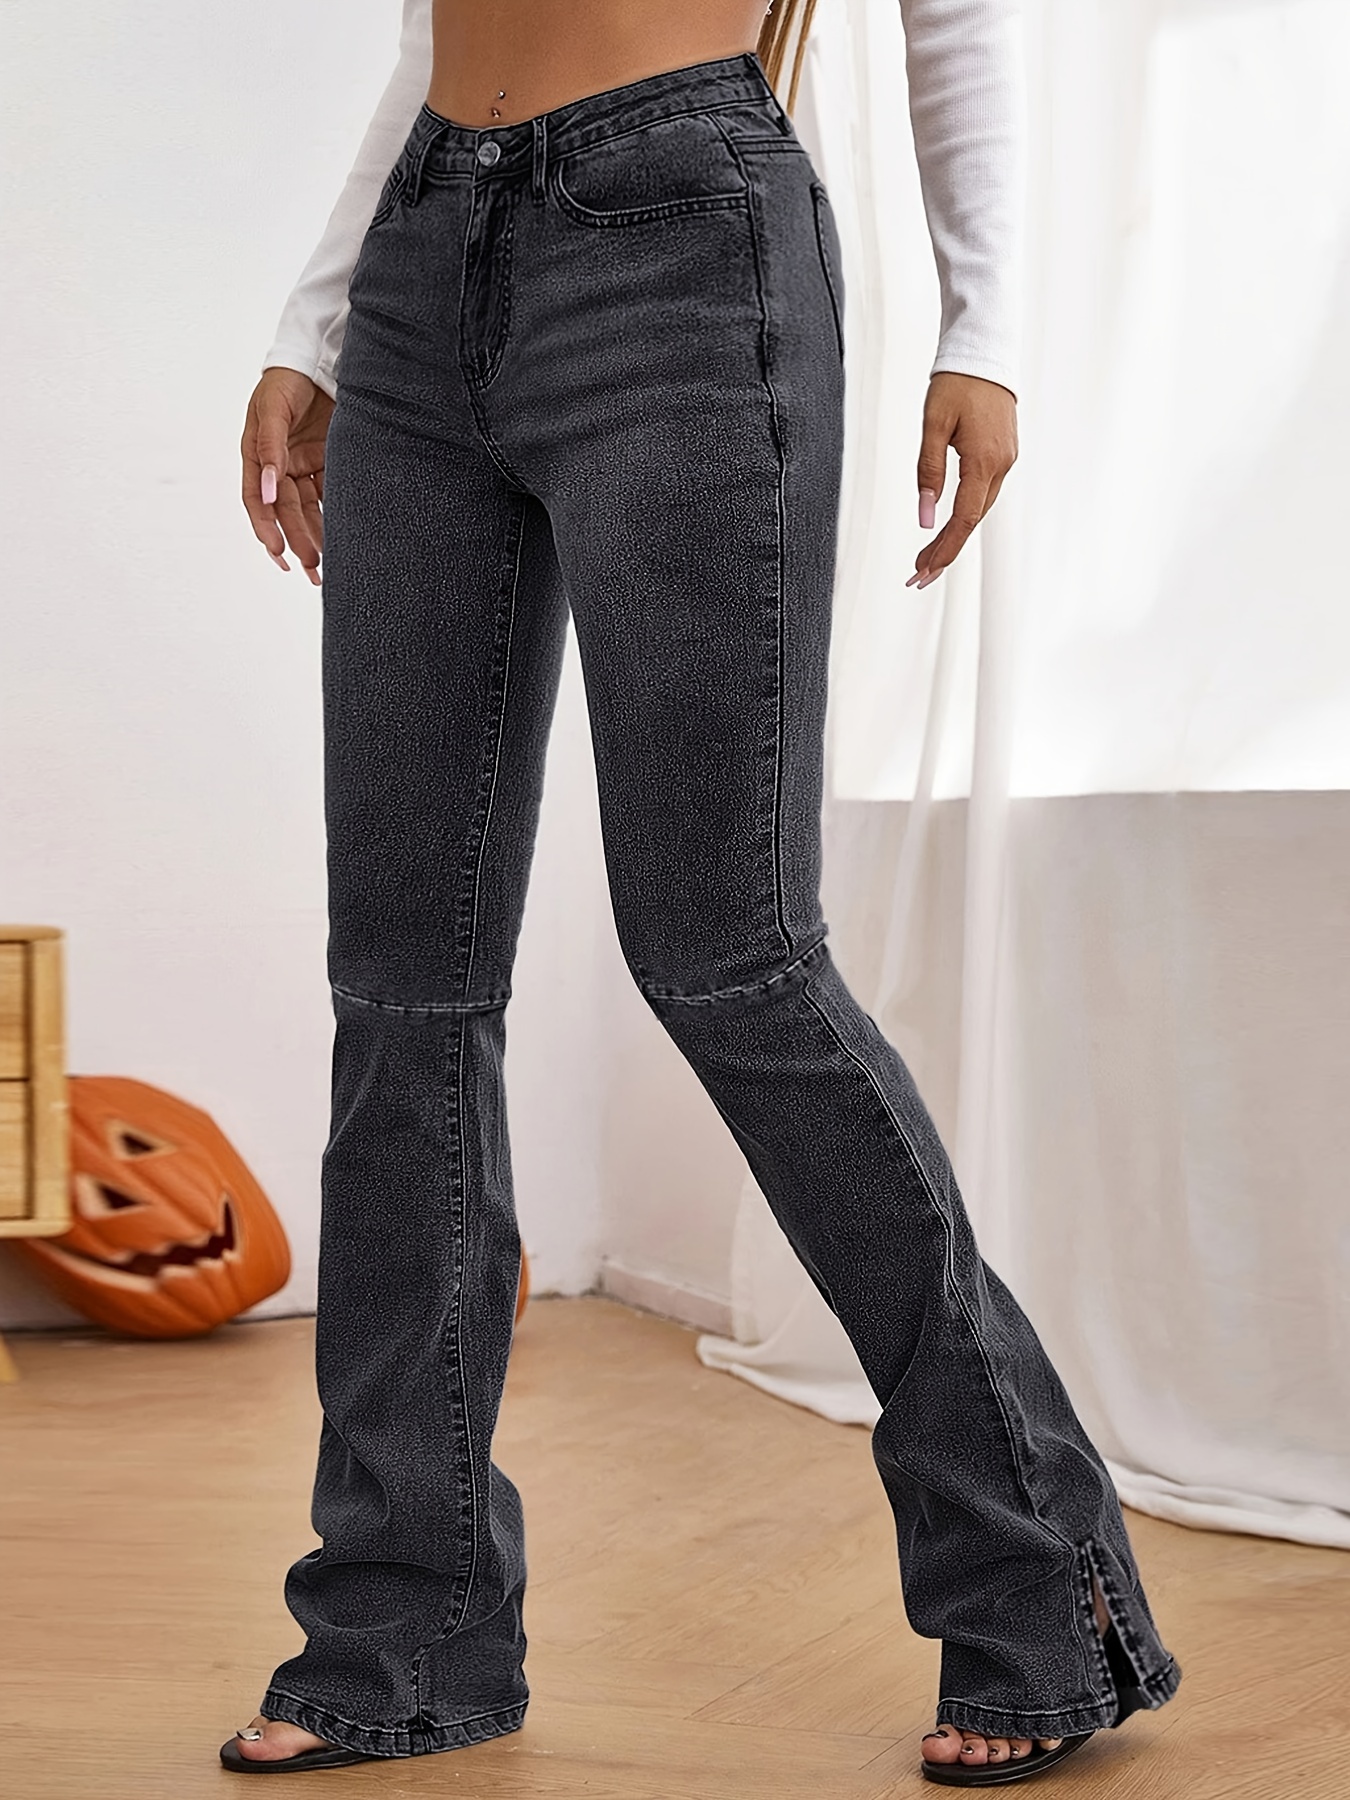 Grey High Rise Bootcut Jeans|244043501-Charcoal-Gray